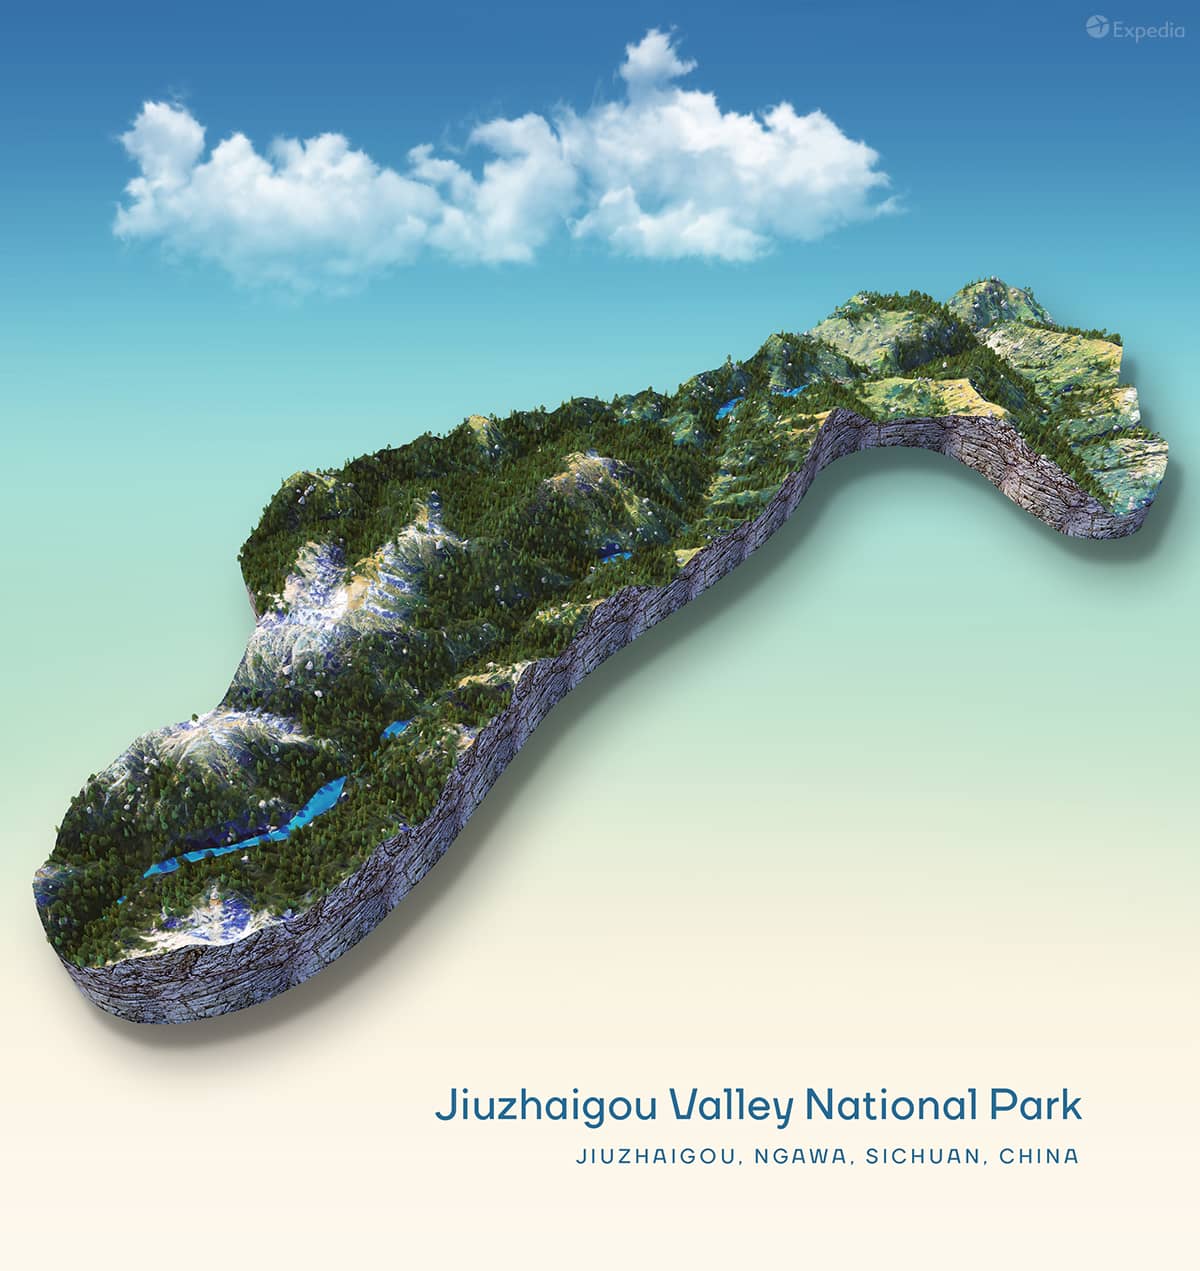 A creative topographic map rendering of Jiuzhaigou Valley National Park in China